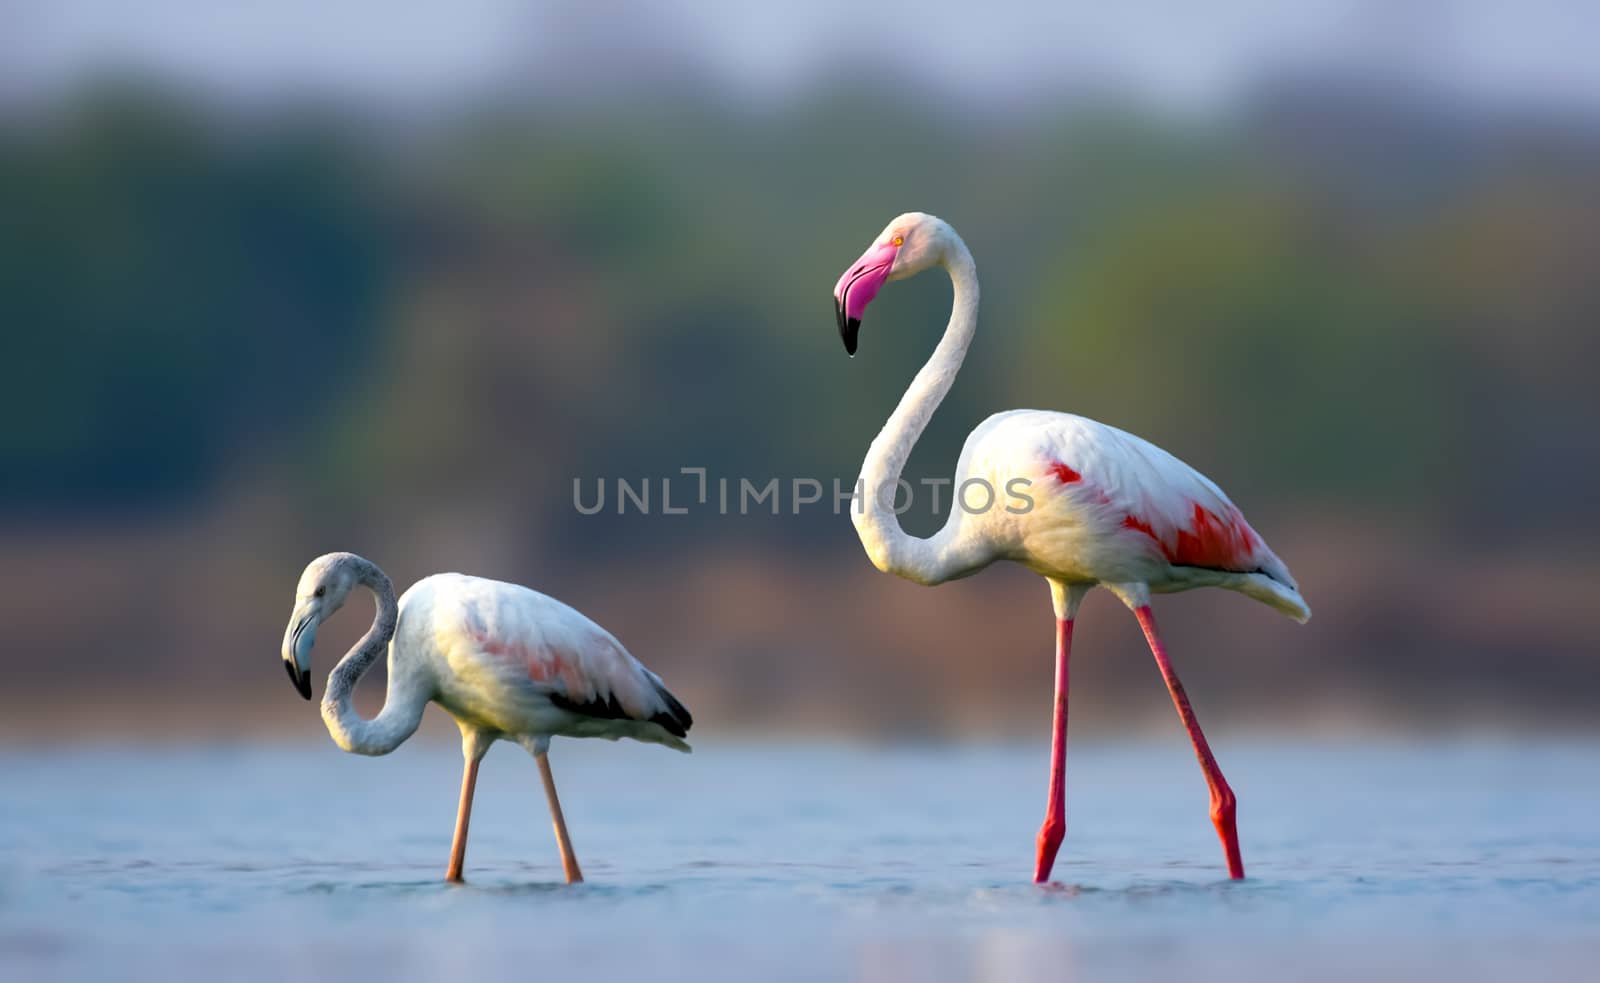 Greater flamingo bird with juvenile or young bird by rkbalaji